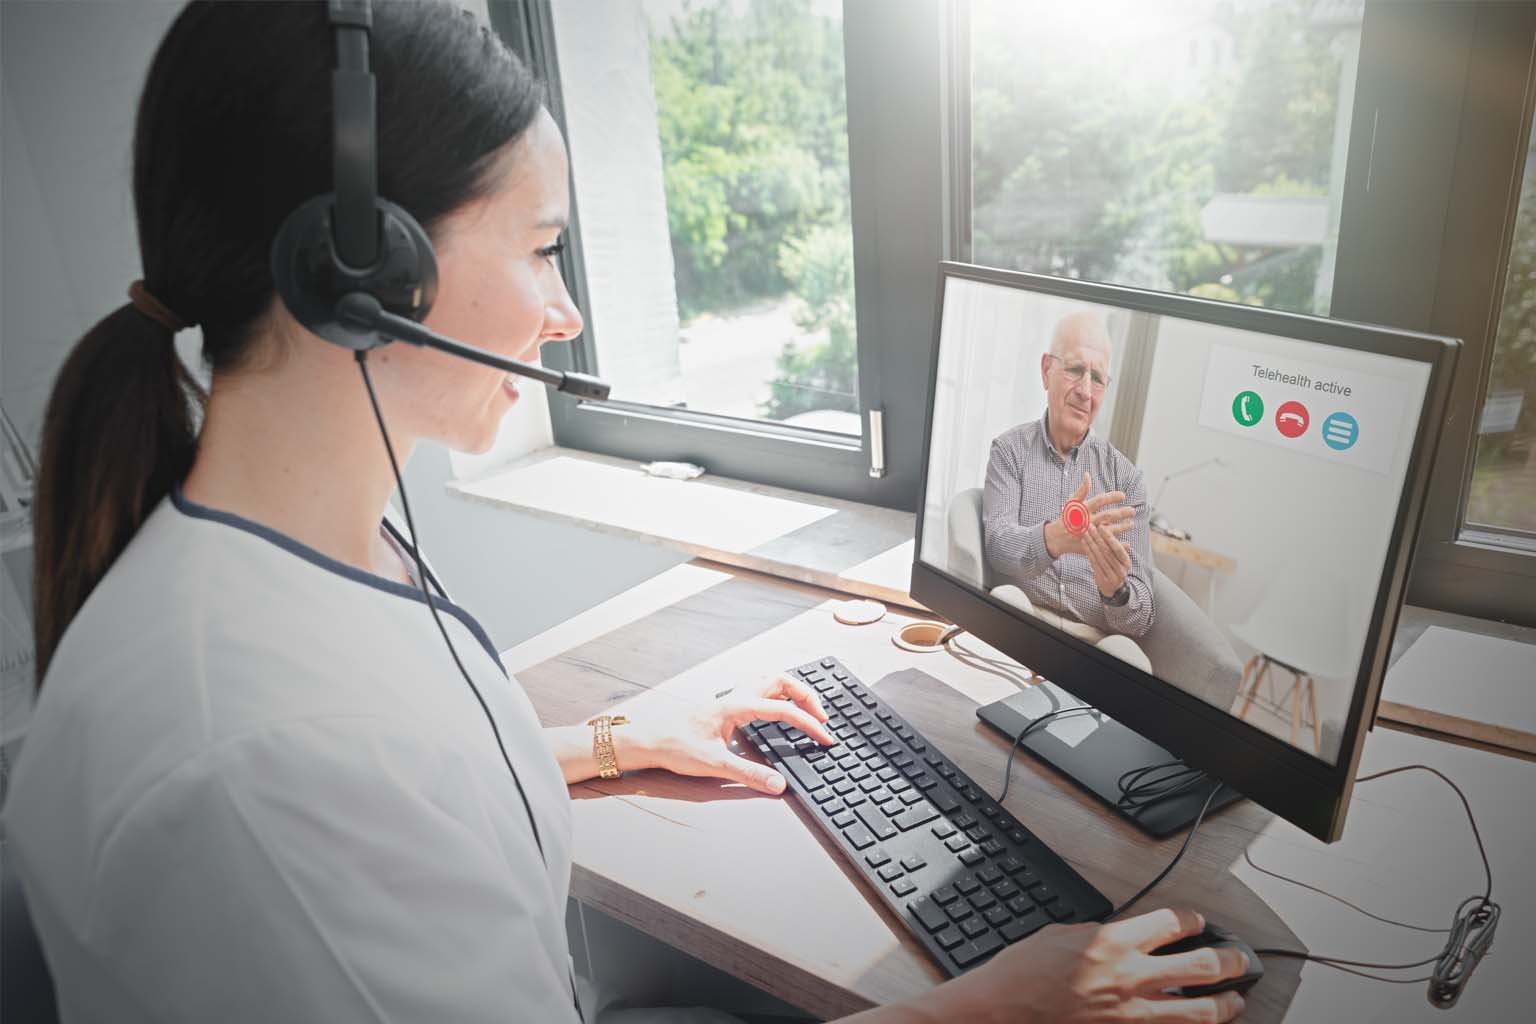 Health care provider at computer on video call with patient